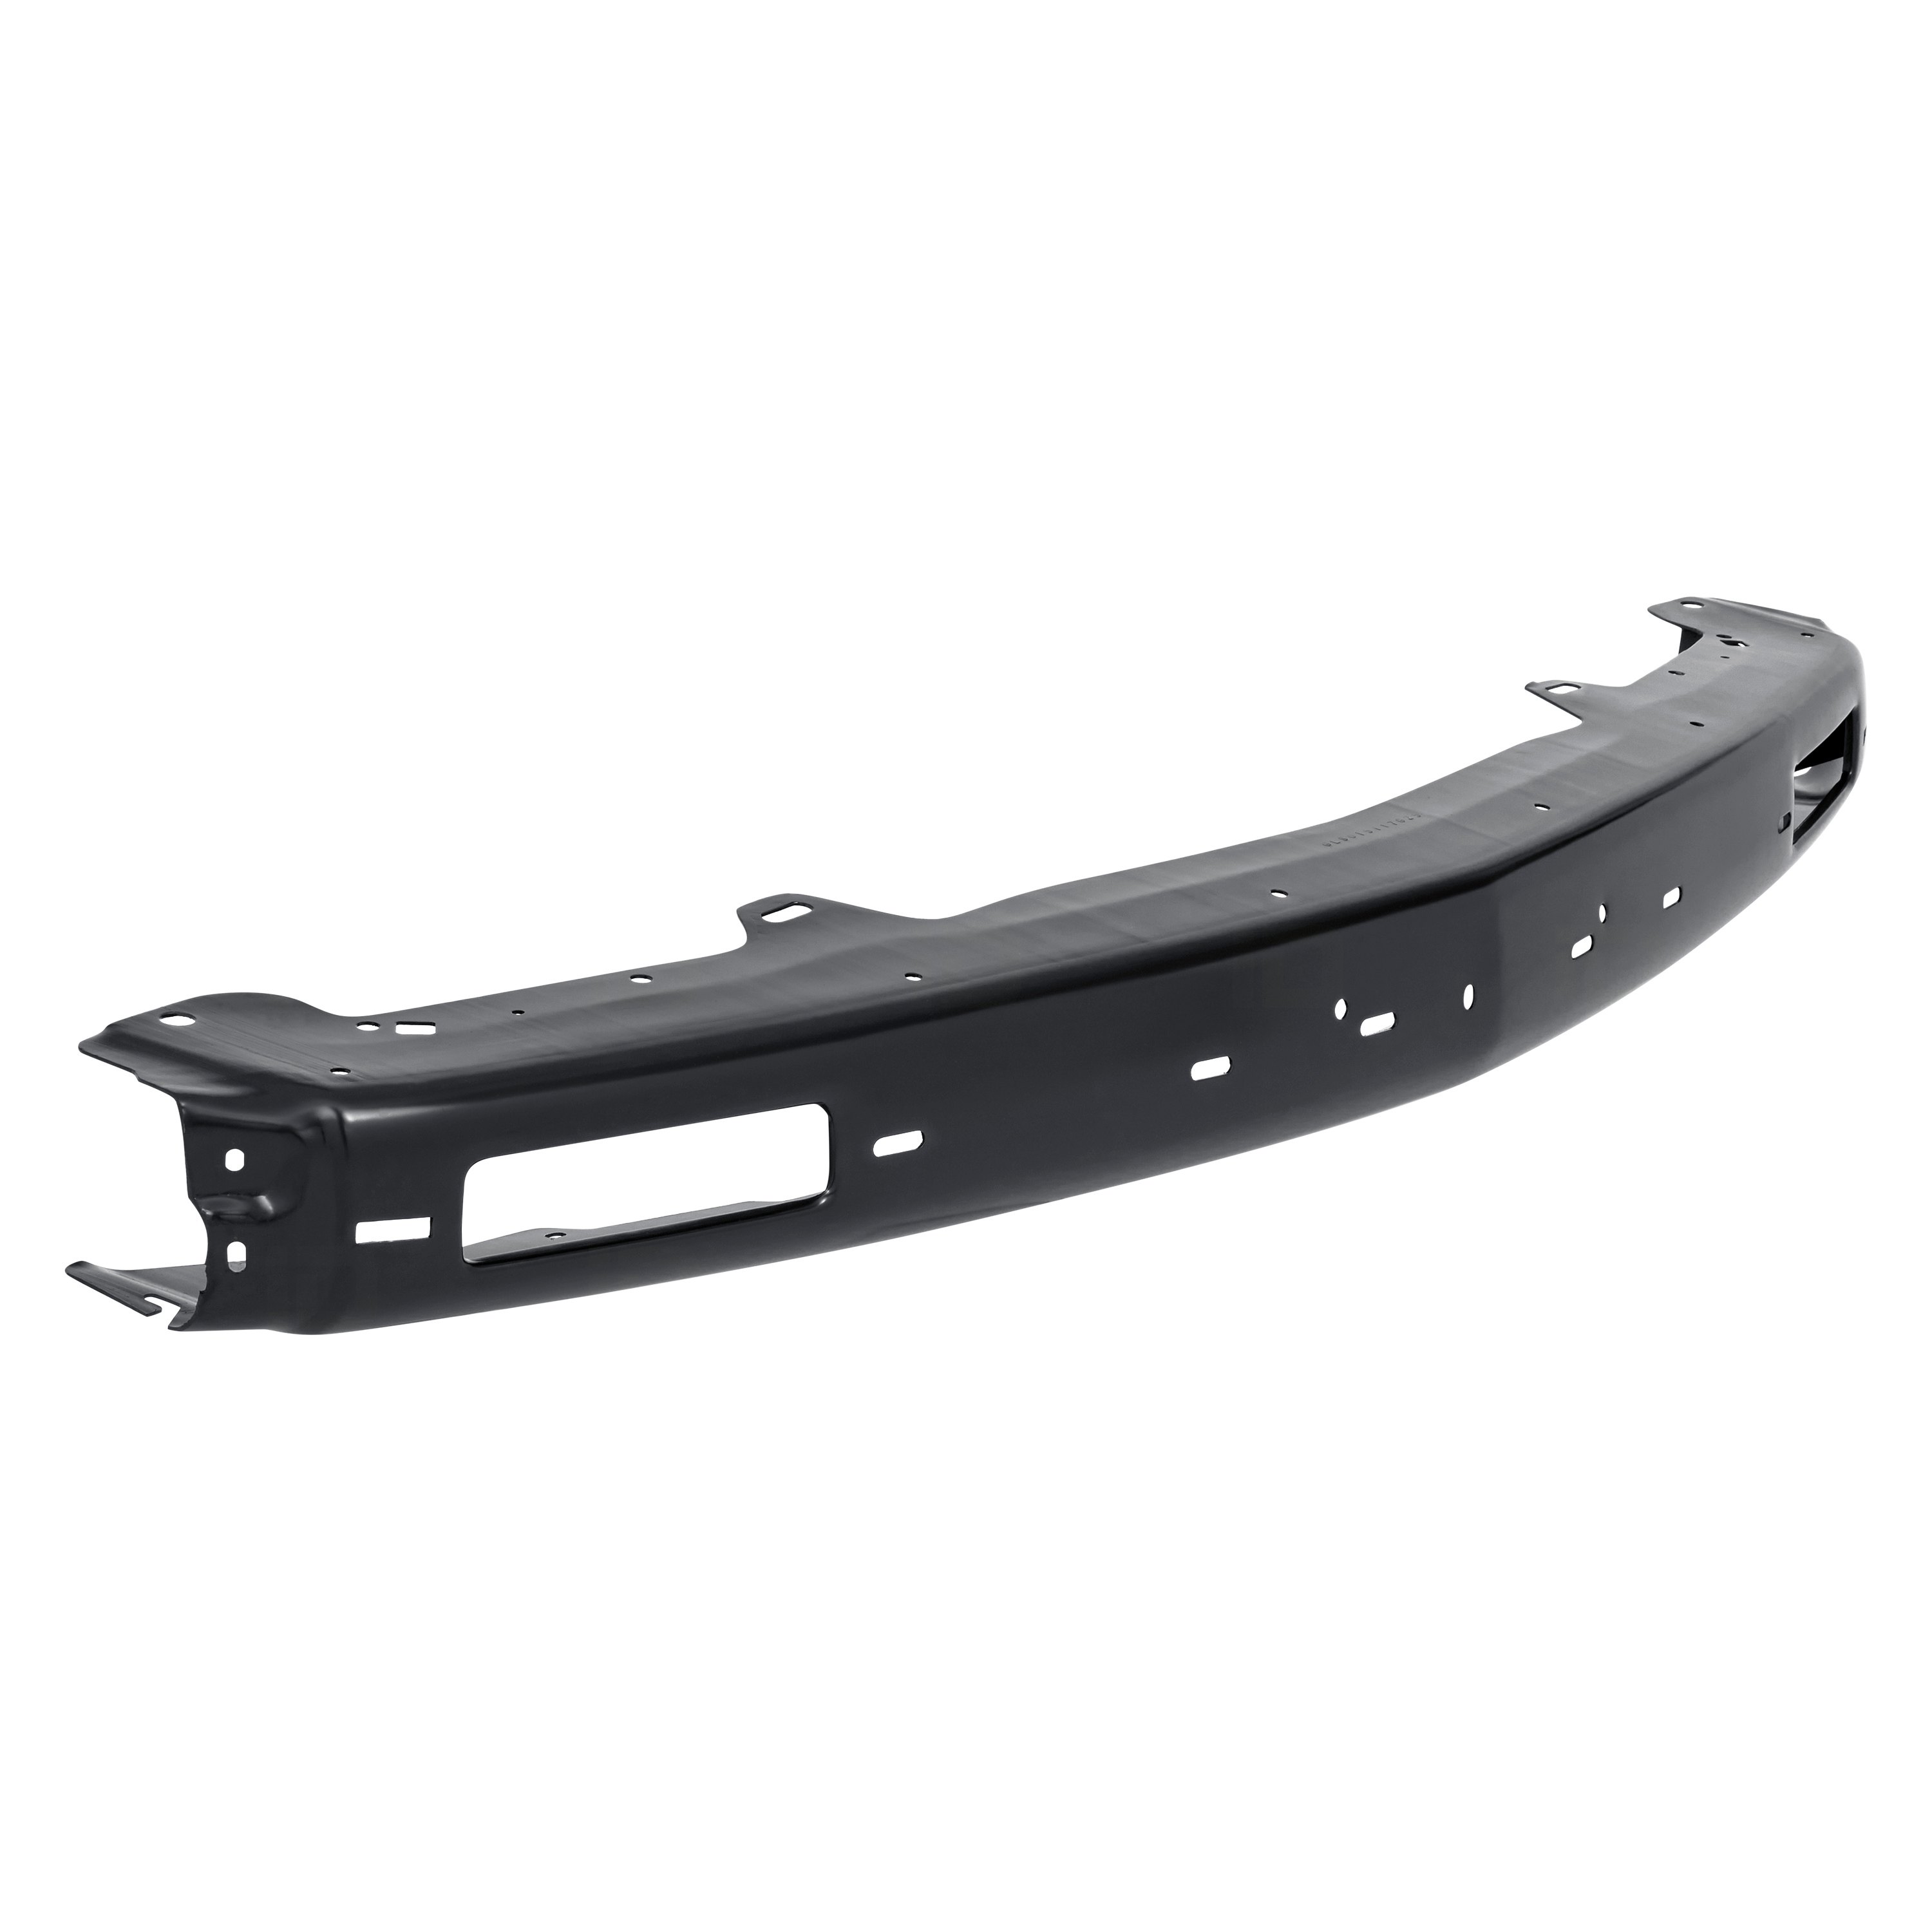 replace front bumper face bar,chevy s-10 pickup replace front bumper ...